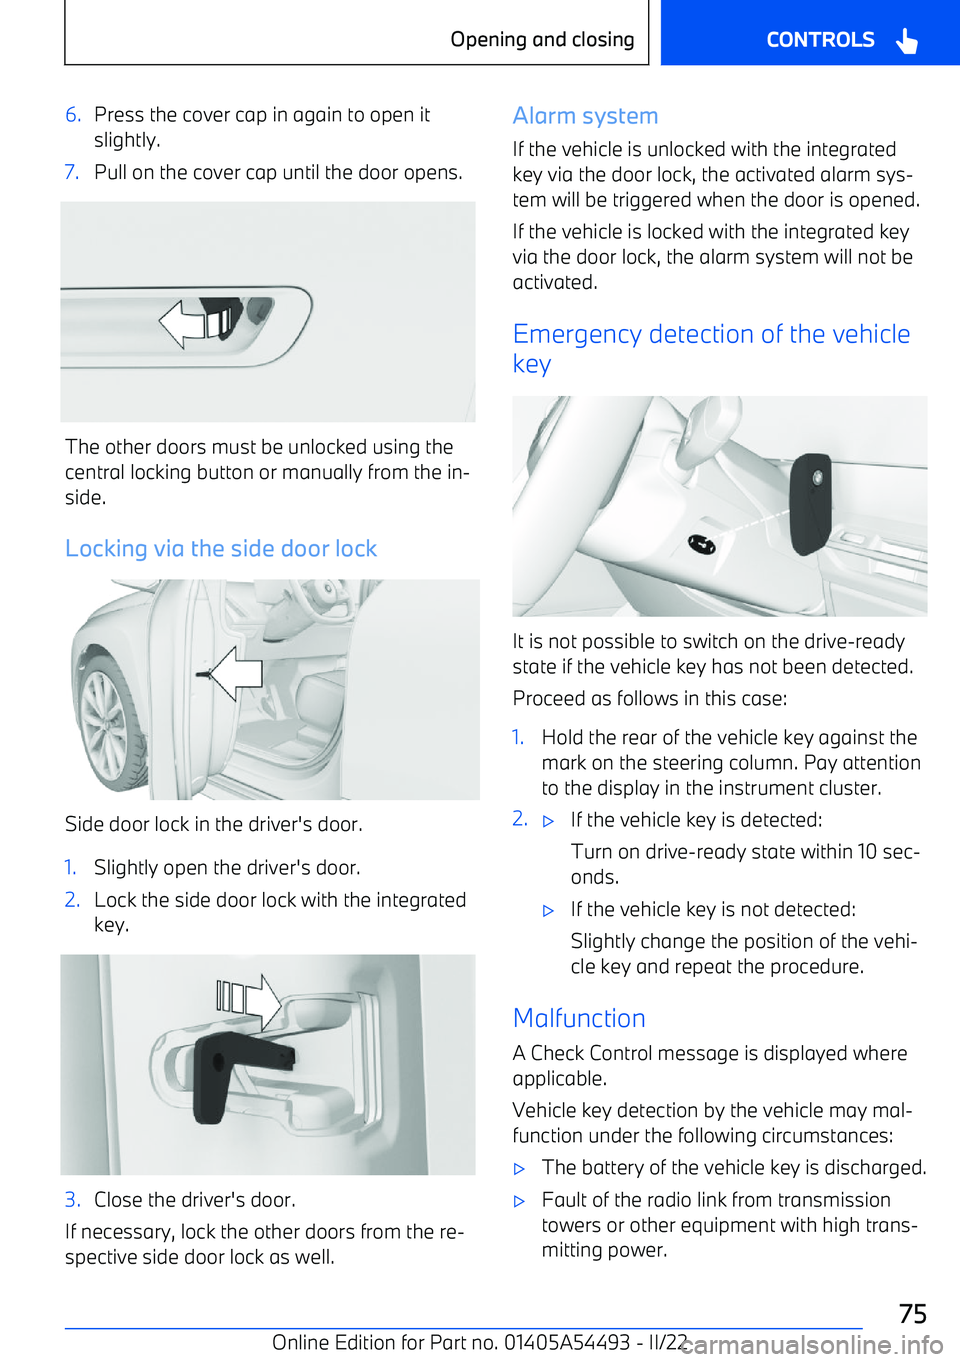 BMW IX 2022  Owners Manual 6.Press the cover cap in again to open it
slightly.7.Pull on the cover cap until the door opens.
The other doors must be unlocked using the
central locking button or manually from the in